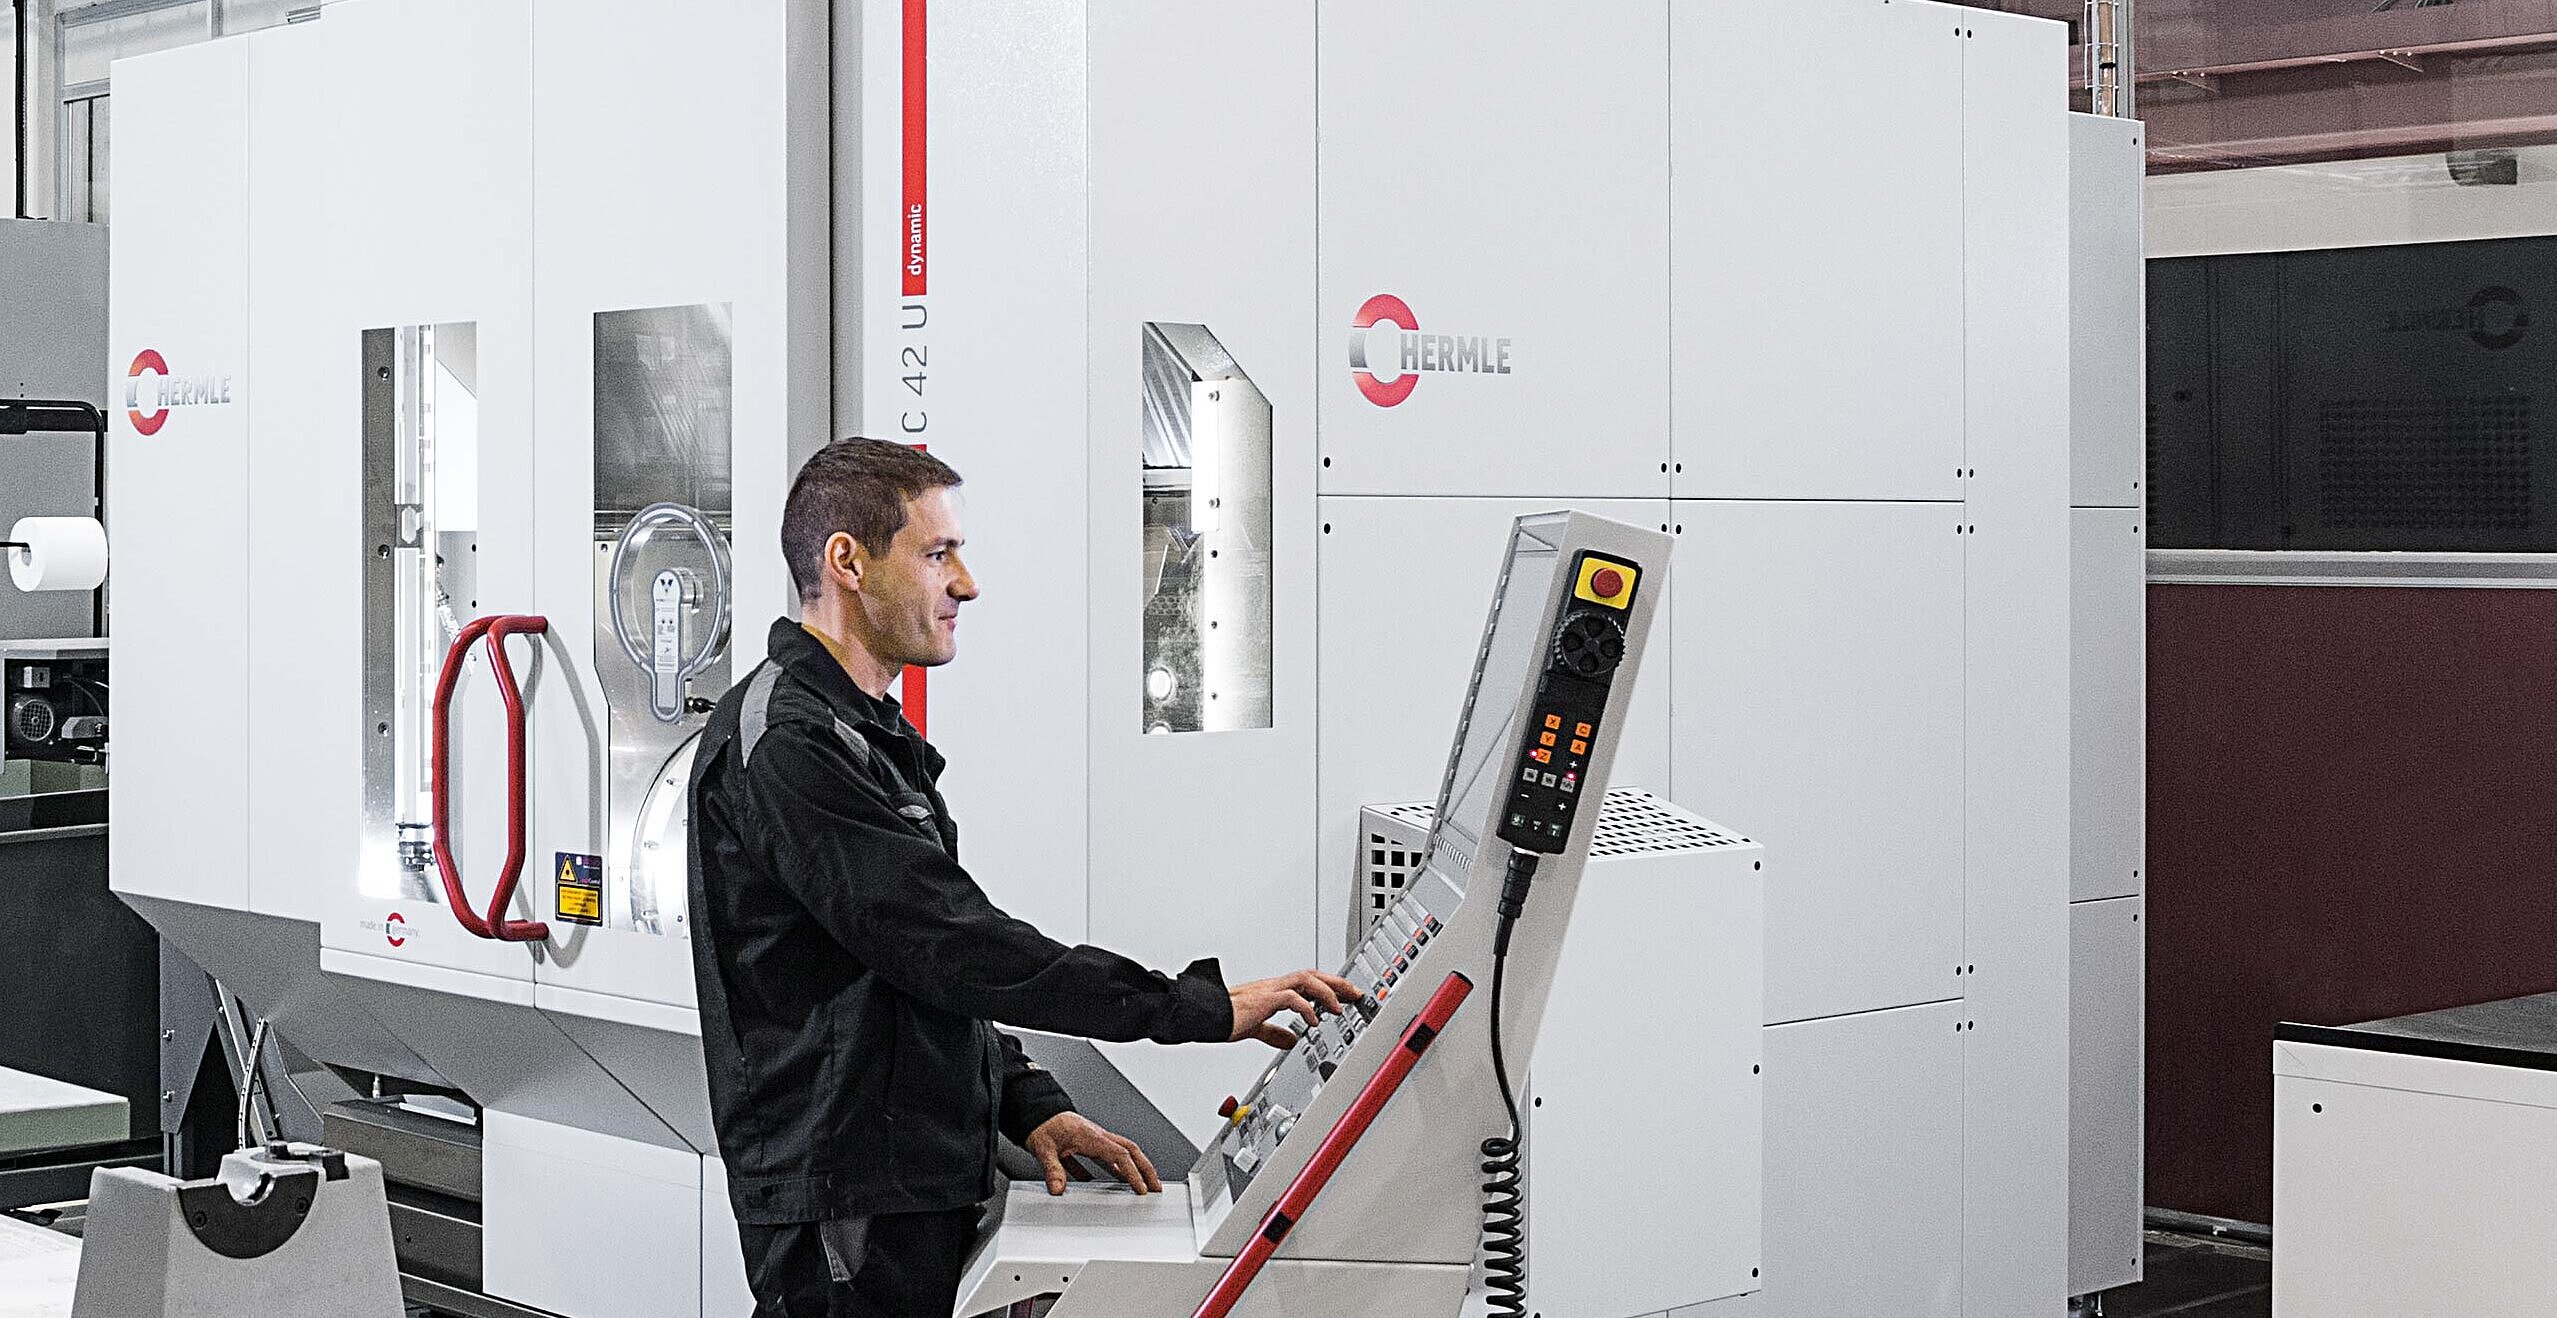 The Hermle 5 axis CNC high-power machining centre C 42 U installed at the CERN Department MME, dynamic, equipped with Precision packages I and II for highly-precise, reproducibly exact quality machining within tolerances of +/-0.5 µm